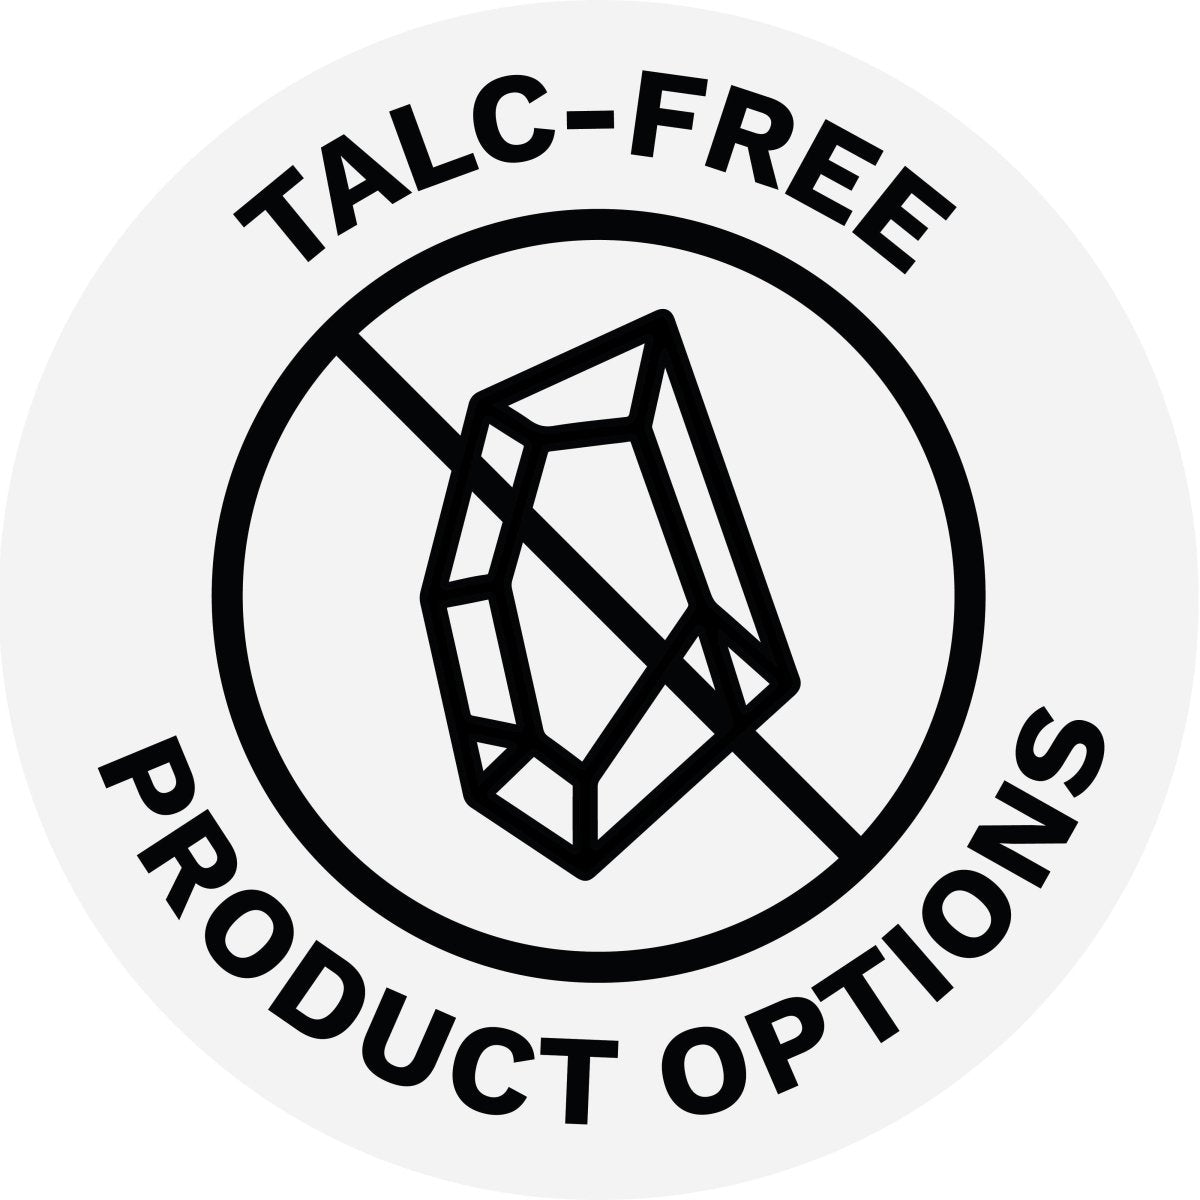 talc-free products made in Canada